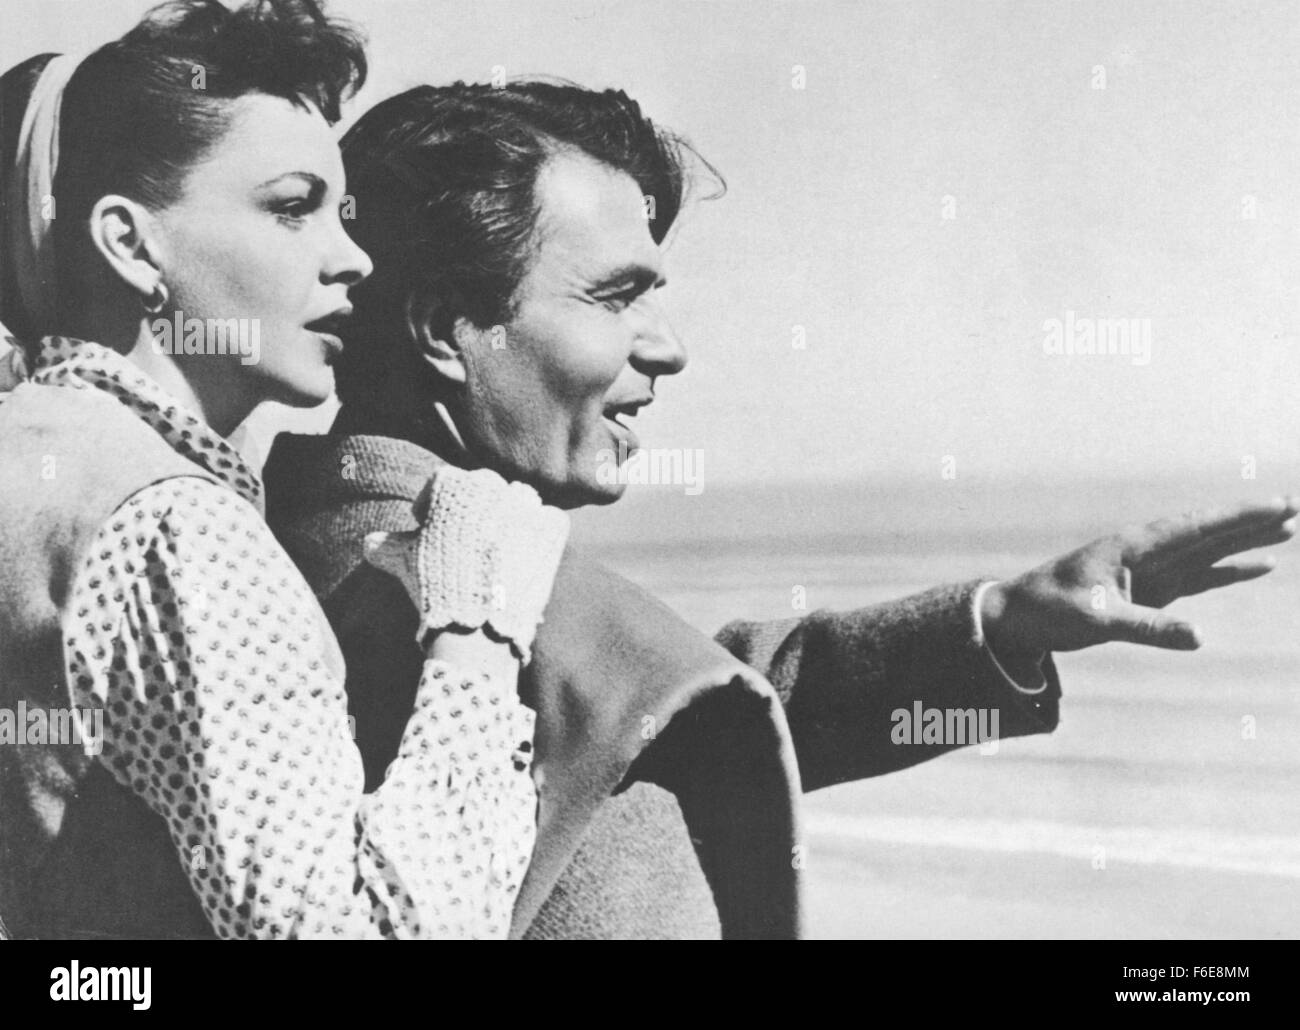 RELEASE DATE: October 16, 1954. MOVIE TITLE: A Star is Born. STUDIO: Warner Bros. Pictures. PLOT: Norman Maine, a movie star whose career is on the wane, meets showgirl Esther Blodgett when he drunkenly stumbles into her act one night. A friendship develops, then blossoms into romance before tensions increase as Esther's career takes off while Norman's continues to plummet. PICTURED: JUDY GARLAND as Vicki Lester/Esther Blodgett and JAMES MASON as Norman Maine. Stock Photo